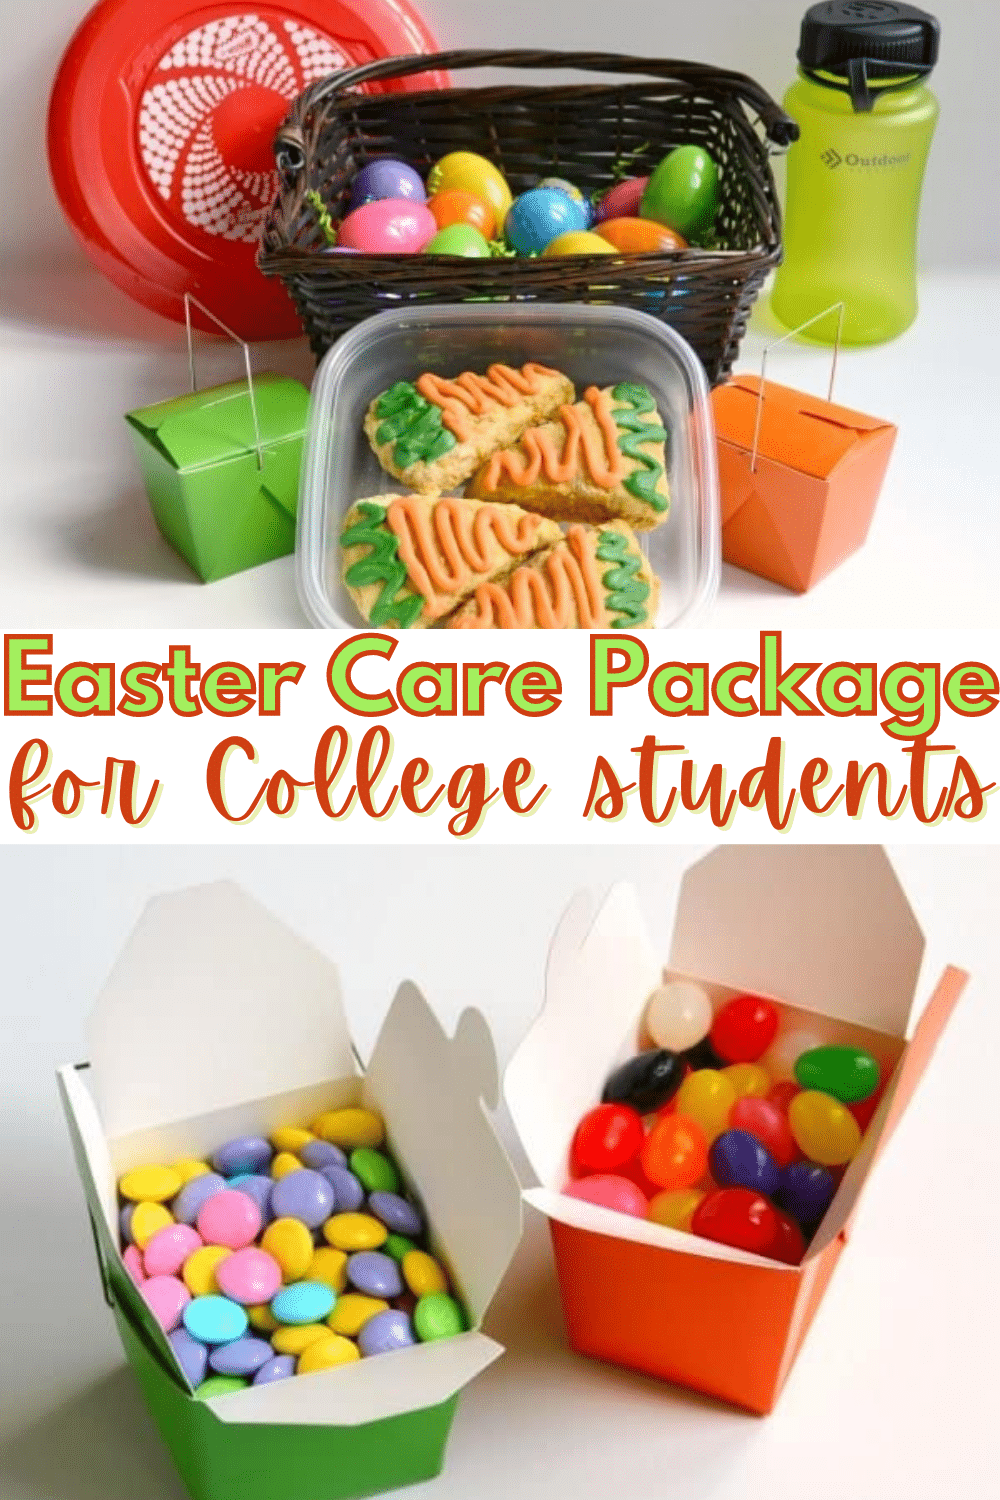 Here are some ideas for items to include in an Easter and Spring themed care package to celebrate the season for college students. #easter #carepackage #spring #collegestudent via @wondermomwannab